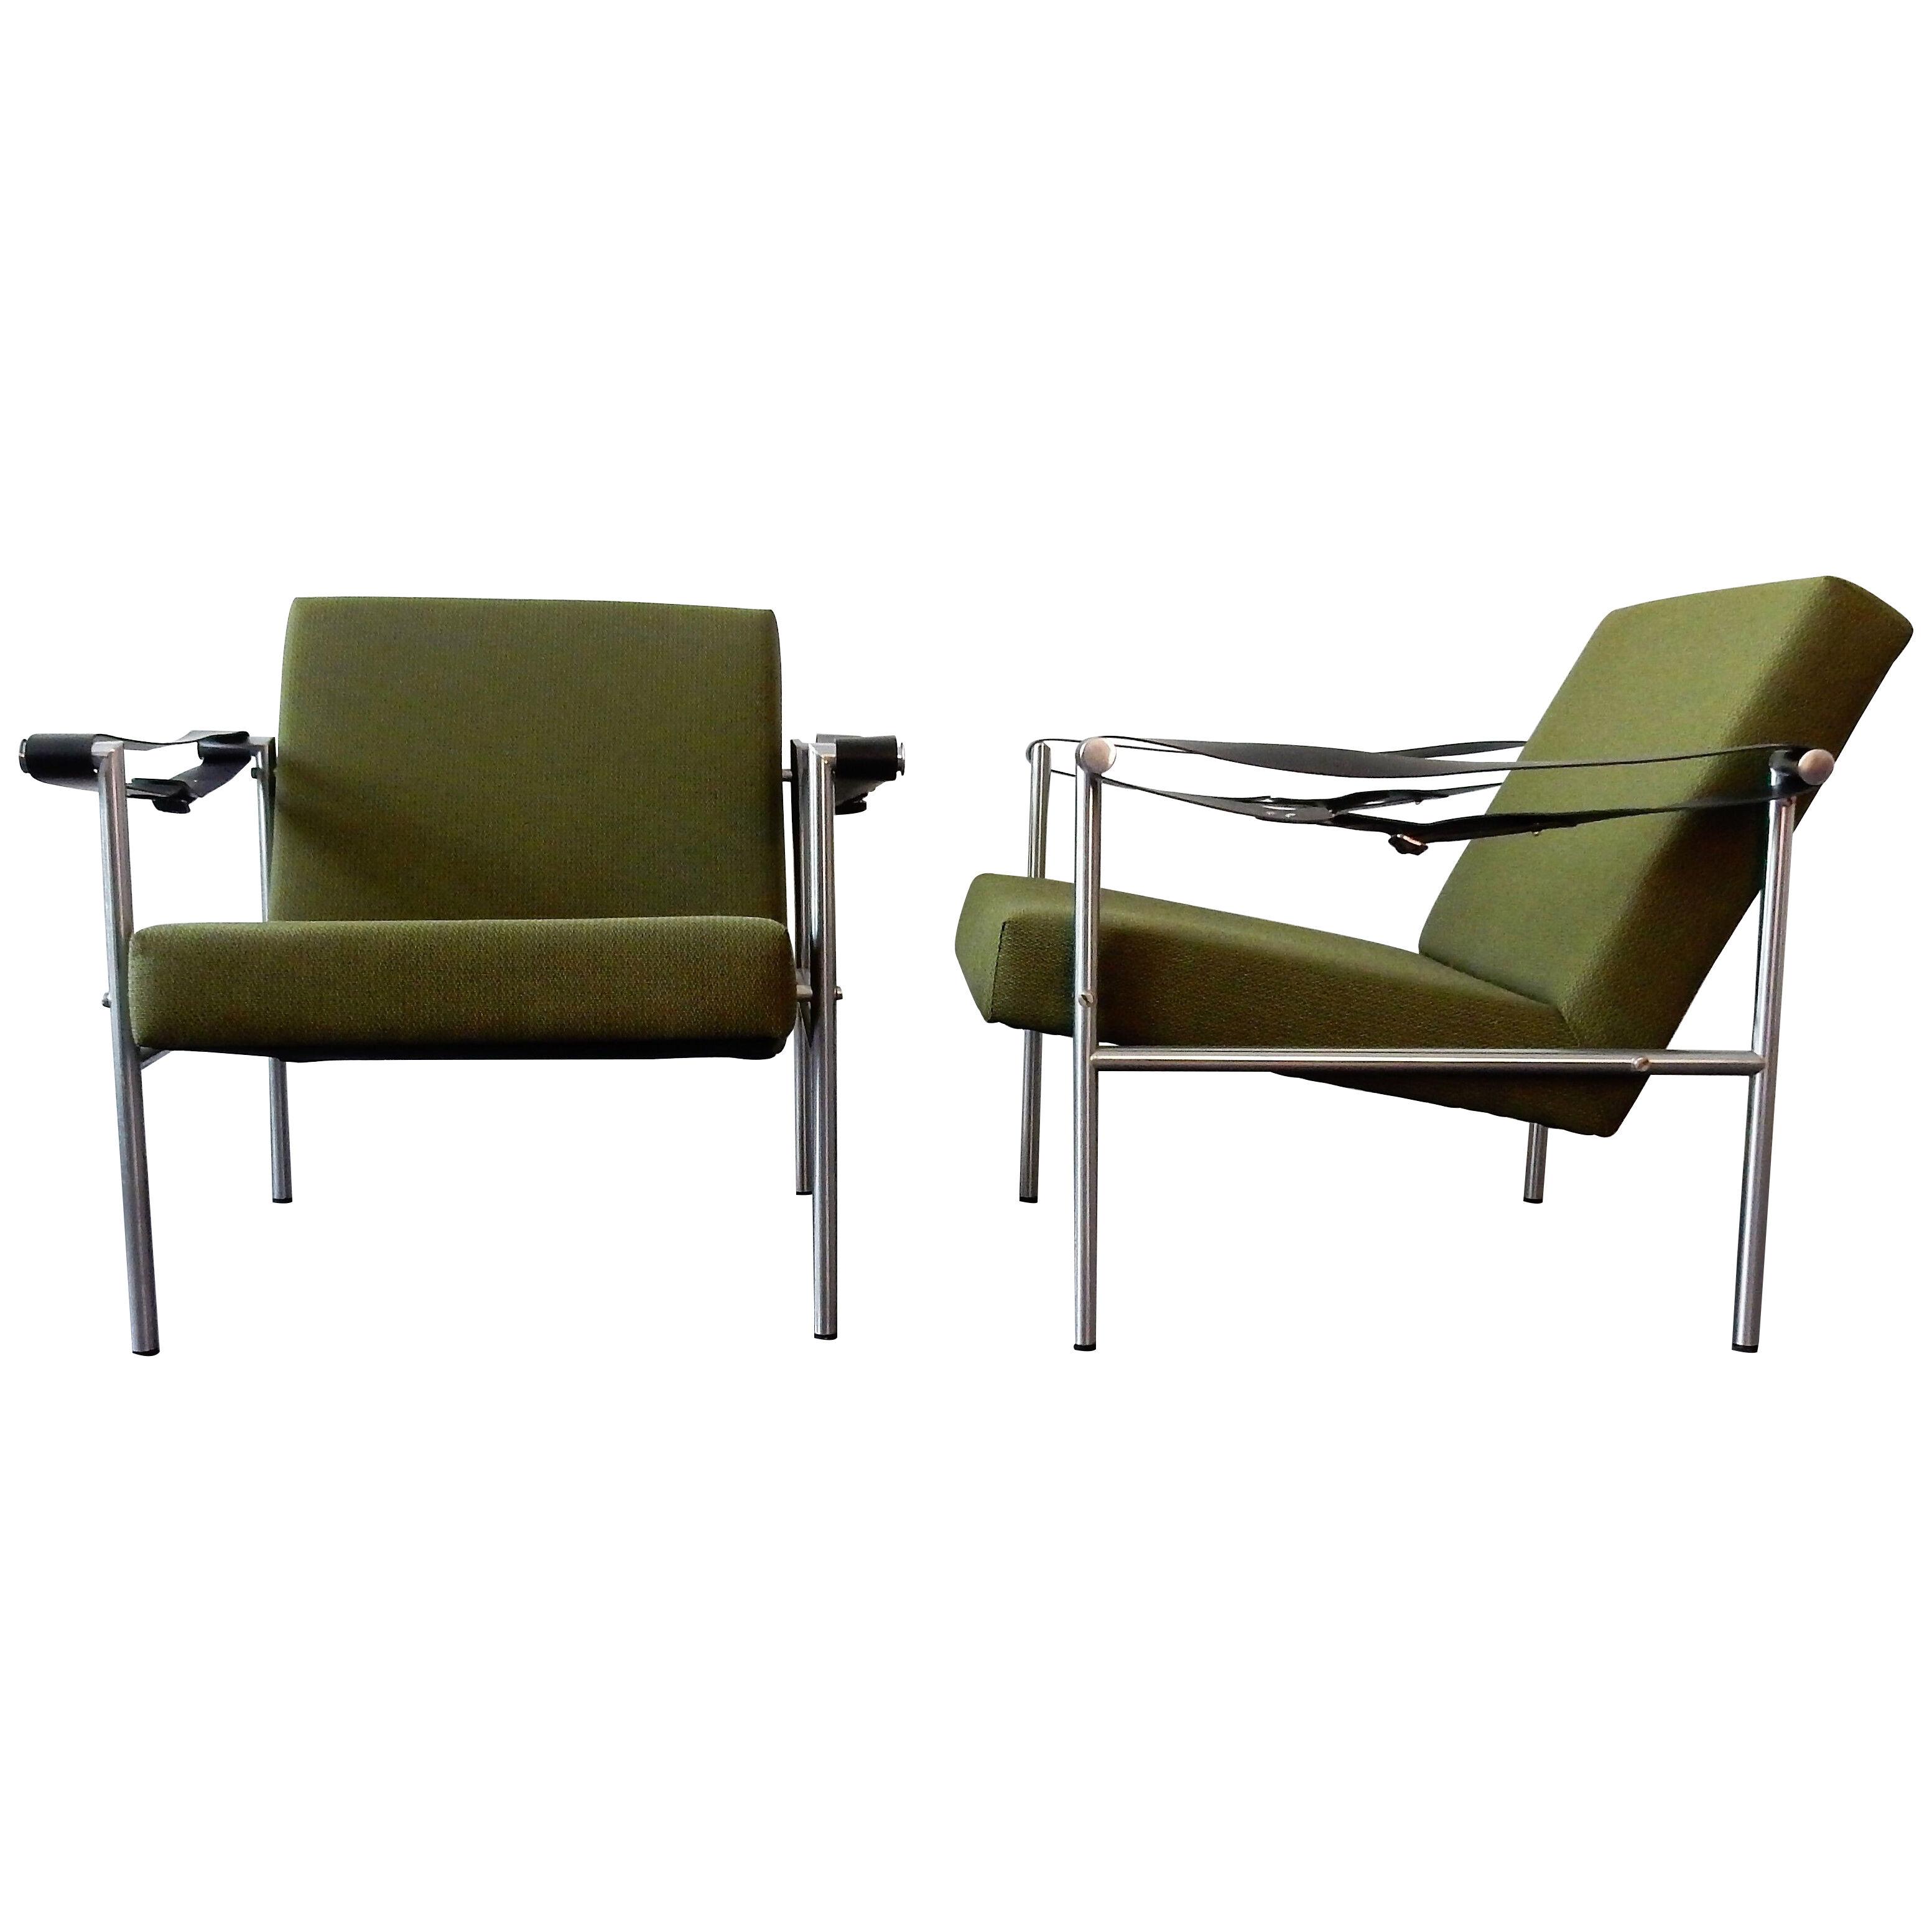 Set of 2 sz38/sz08 easy chairs by Martin Visser for 't Spectrum, 1960's